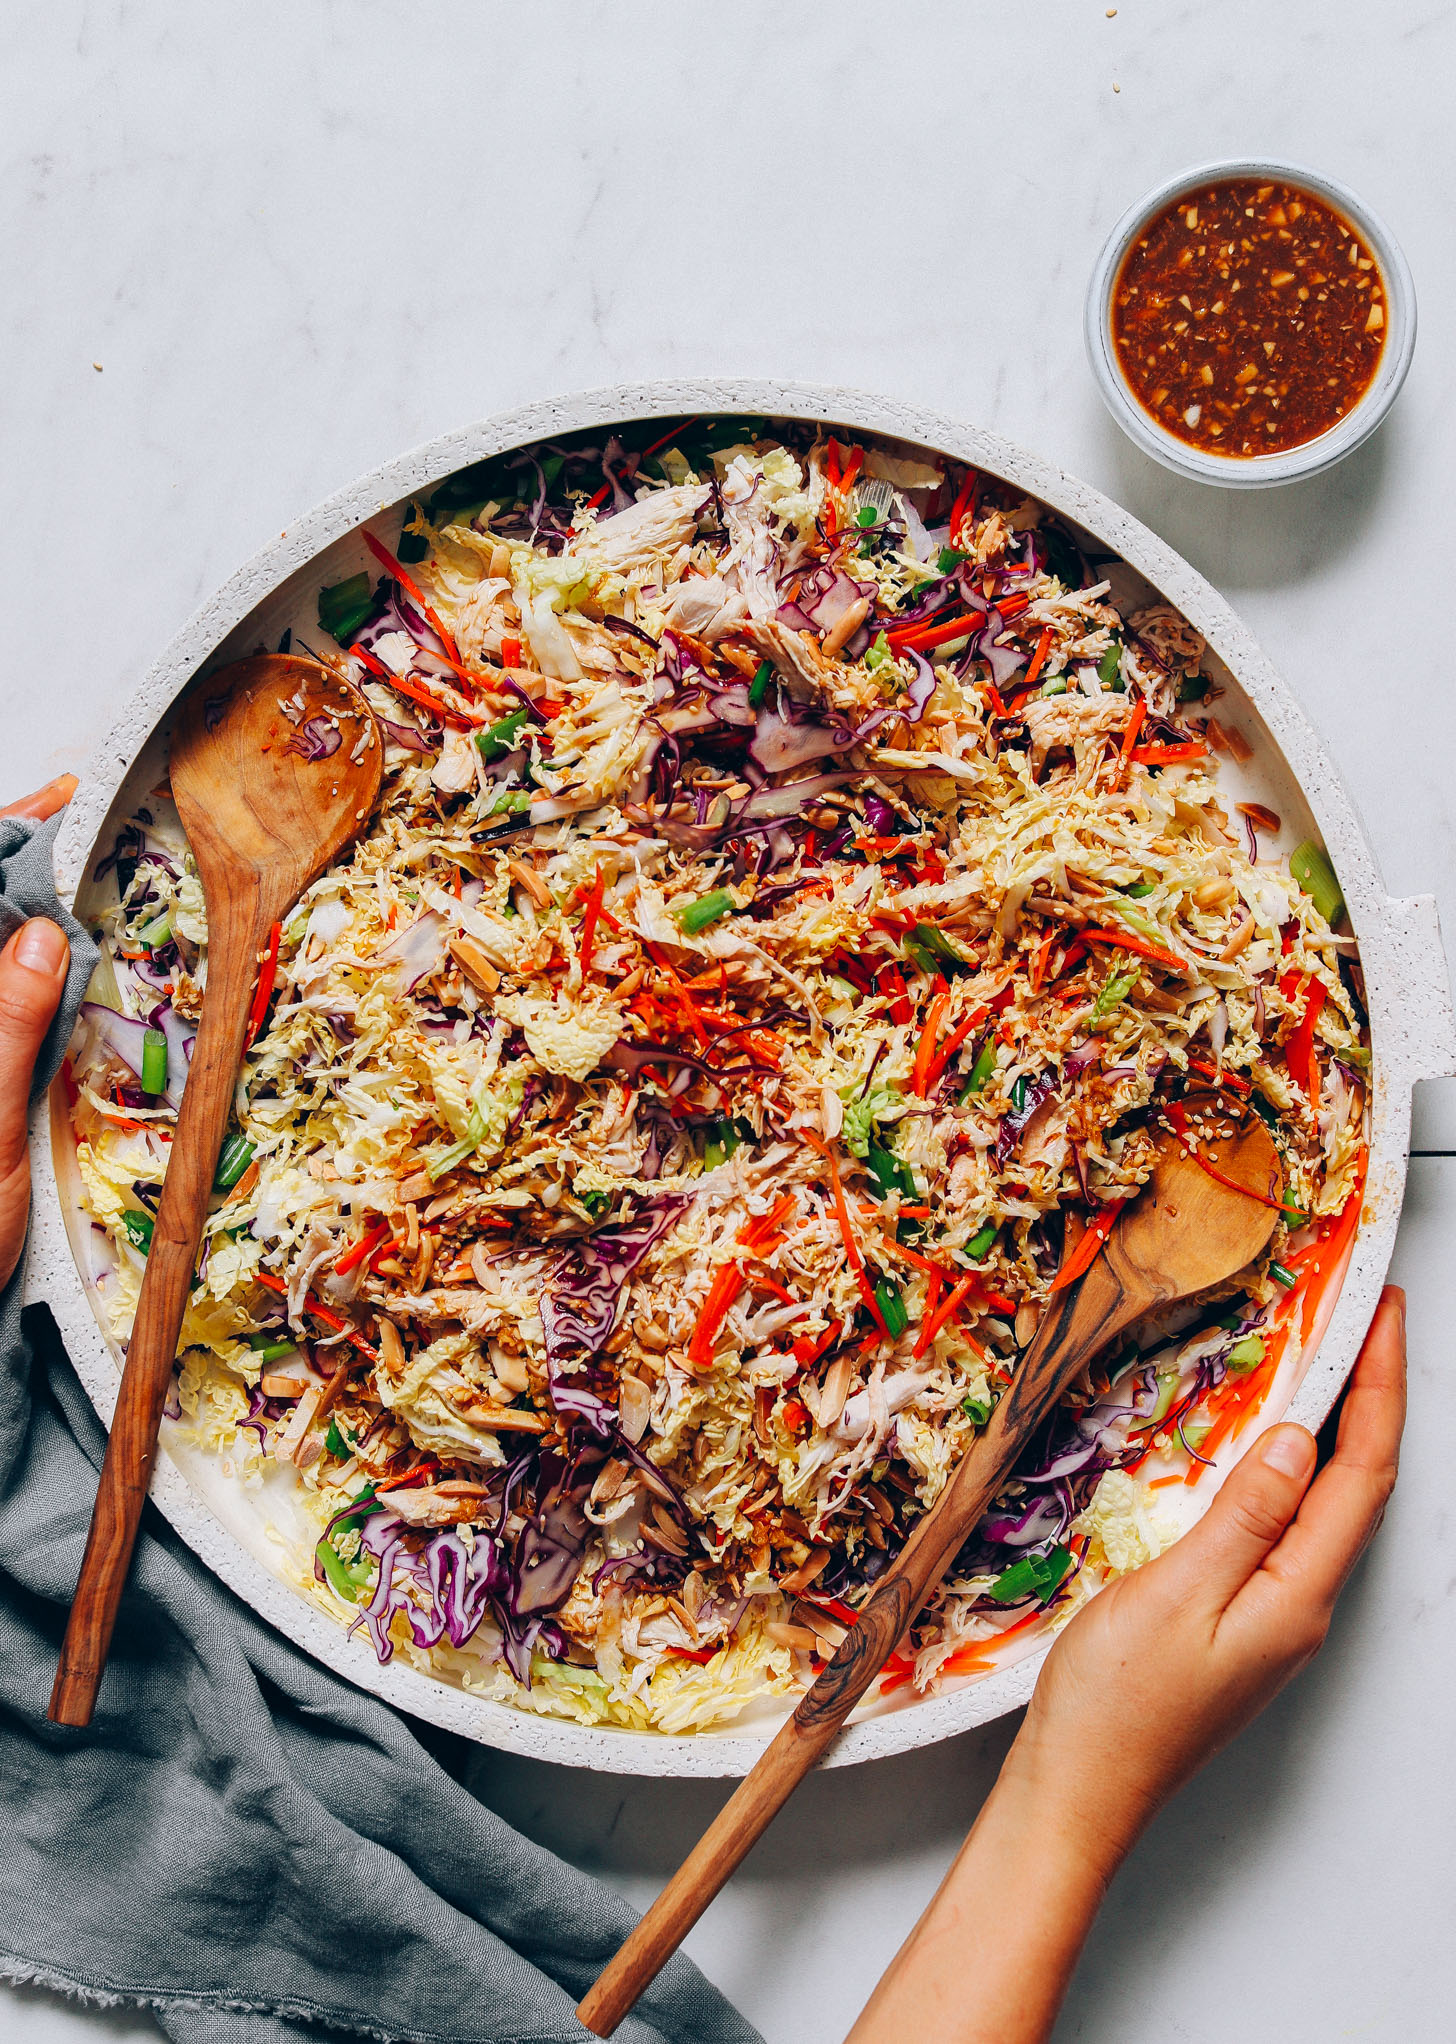 Platter of Crunchy Cabbage Slaw beside a bowl of gluten-free and soy-free dressing